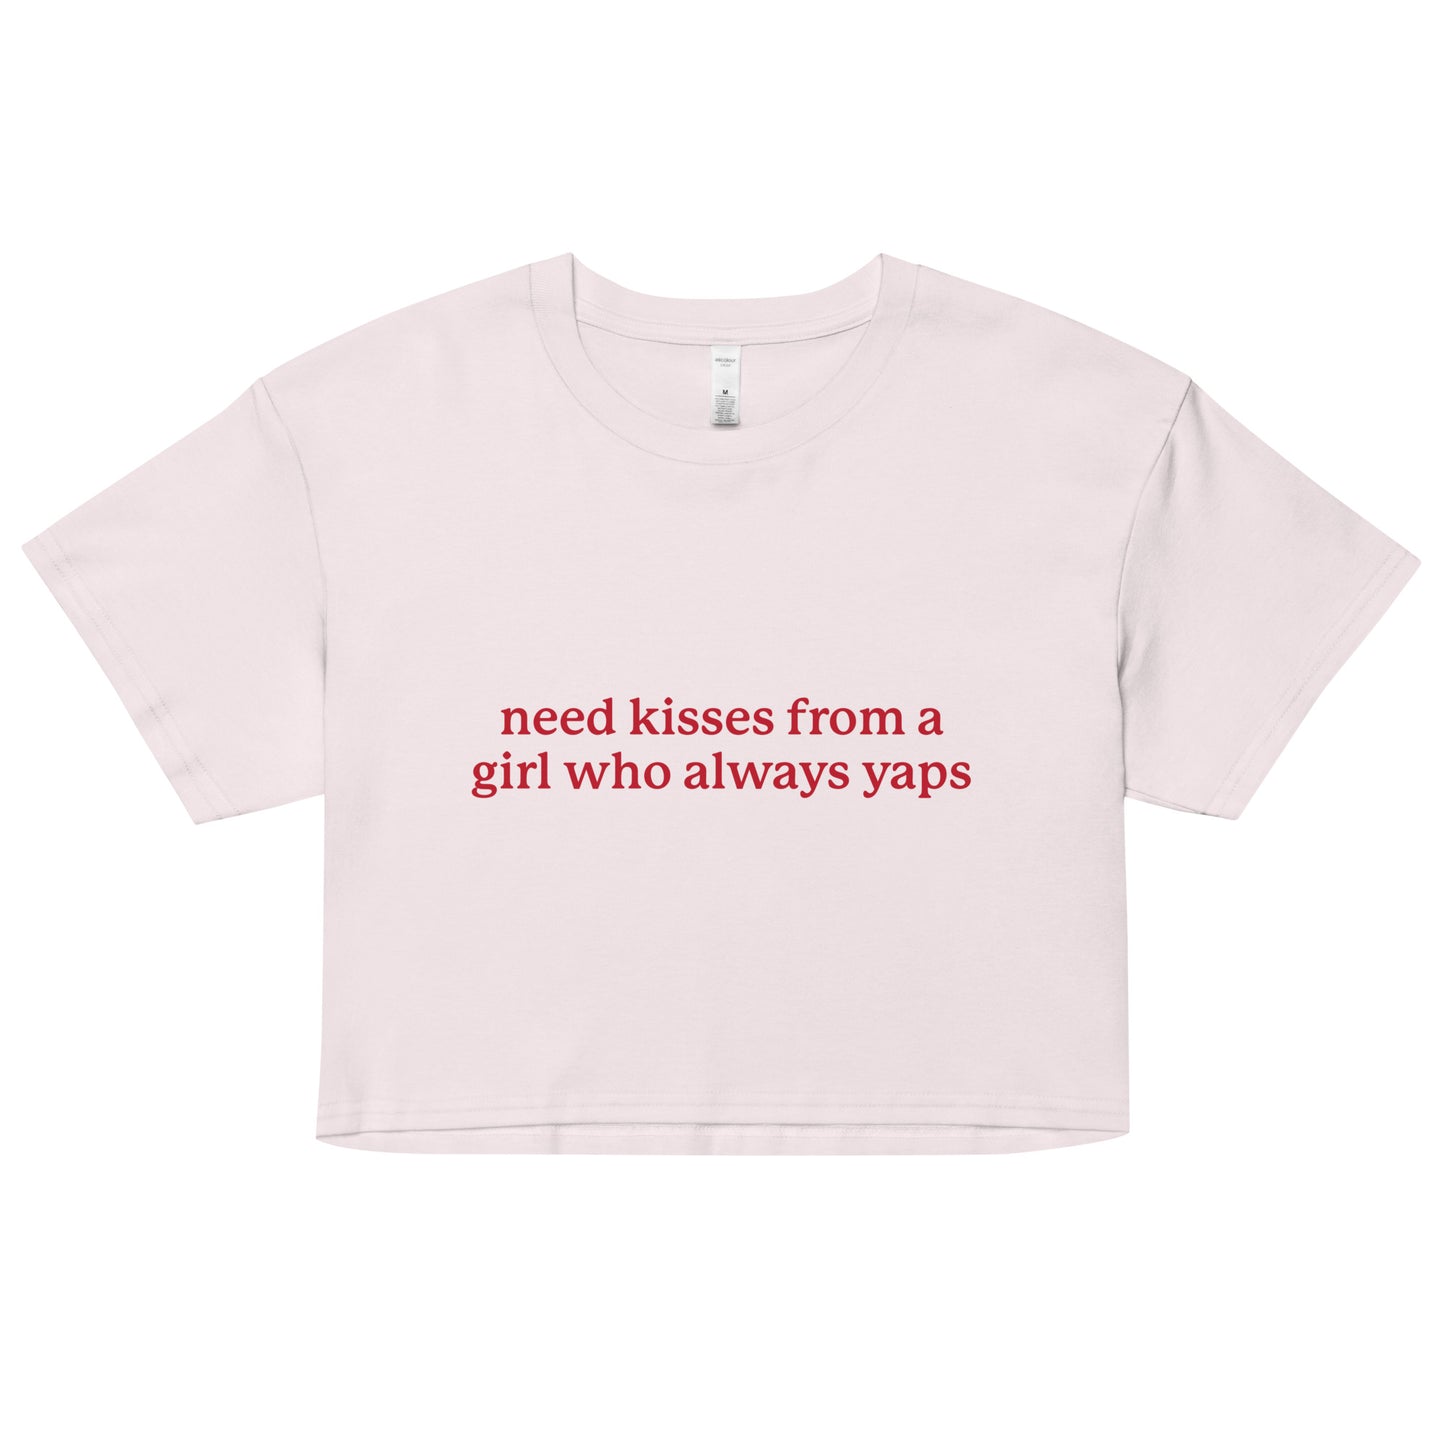 Need Kisses From a Girl Who Always Yaps crop top